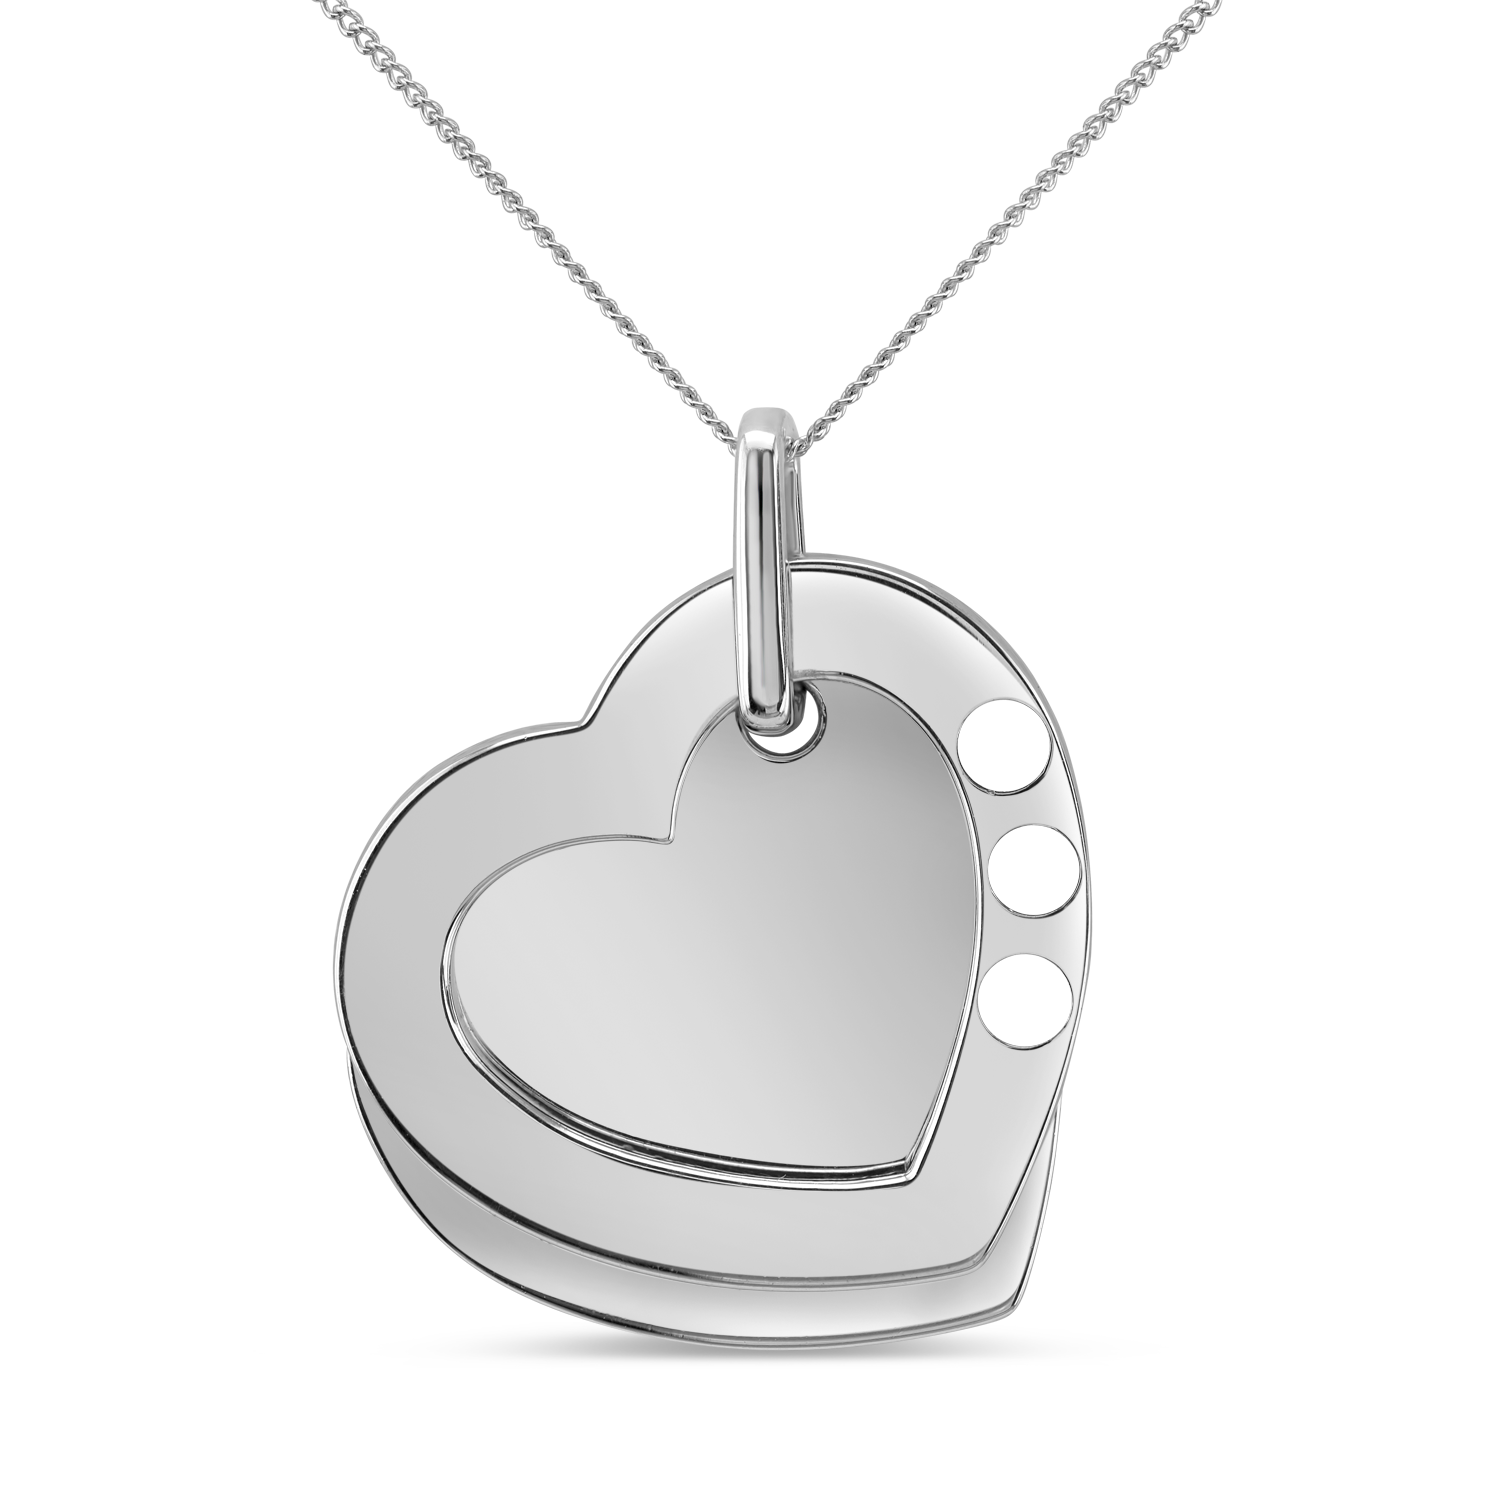 Sterling Silver Engravable Heart Cage Pendant With 1 - 6 Heart Gemstones